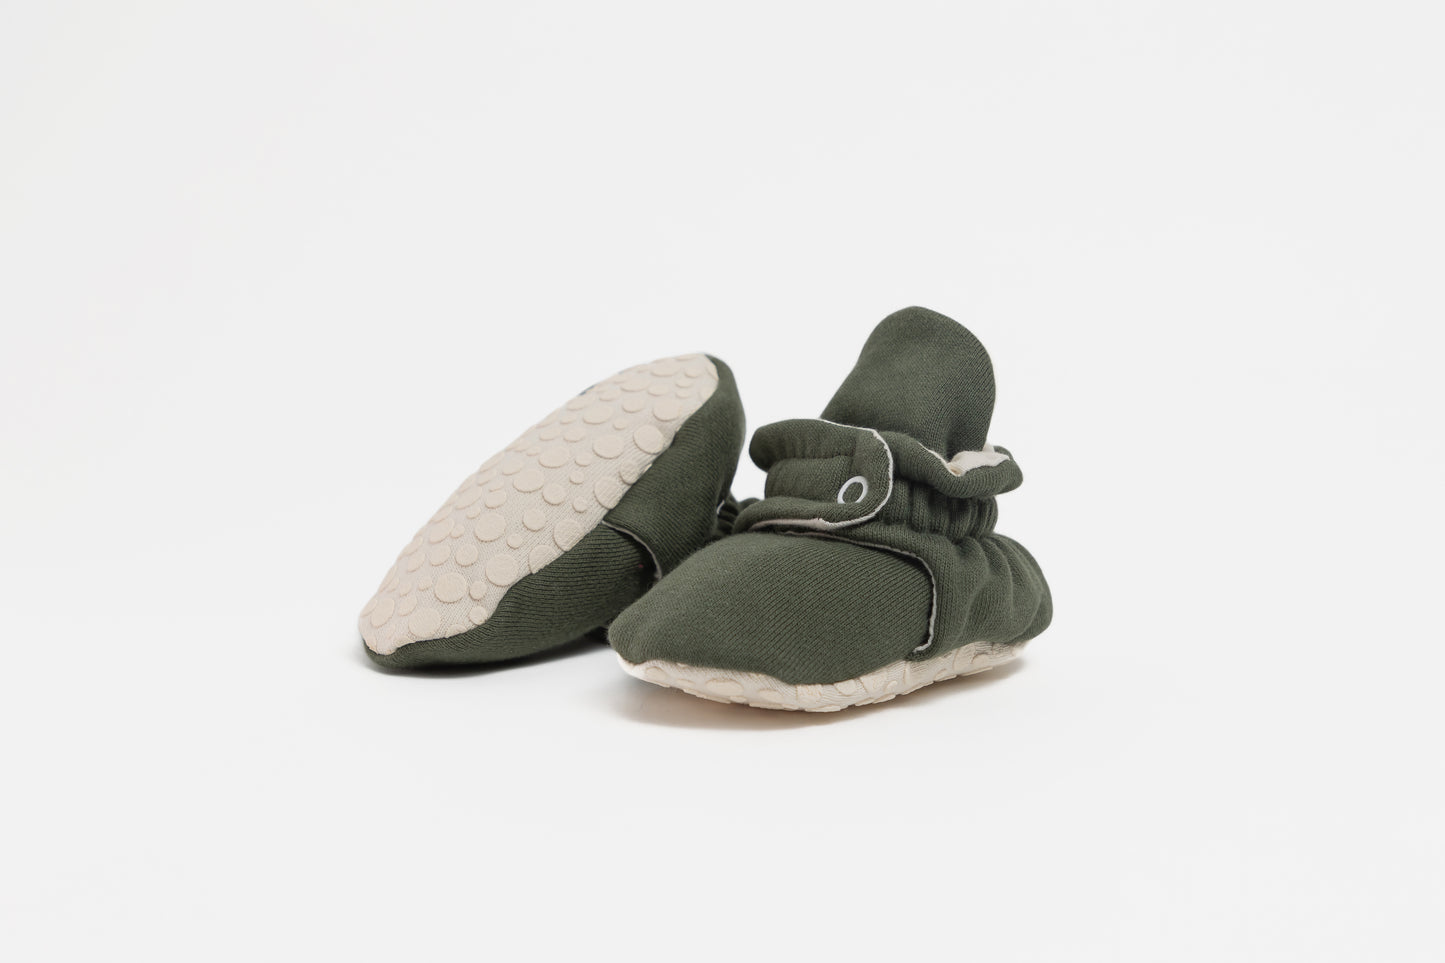 Baby Booties Olive Treat (inverno) - Zás Trás for Babies